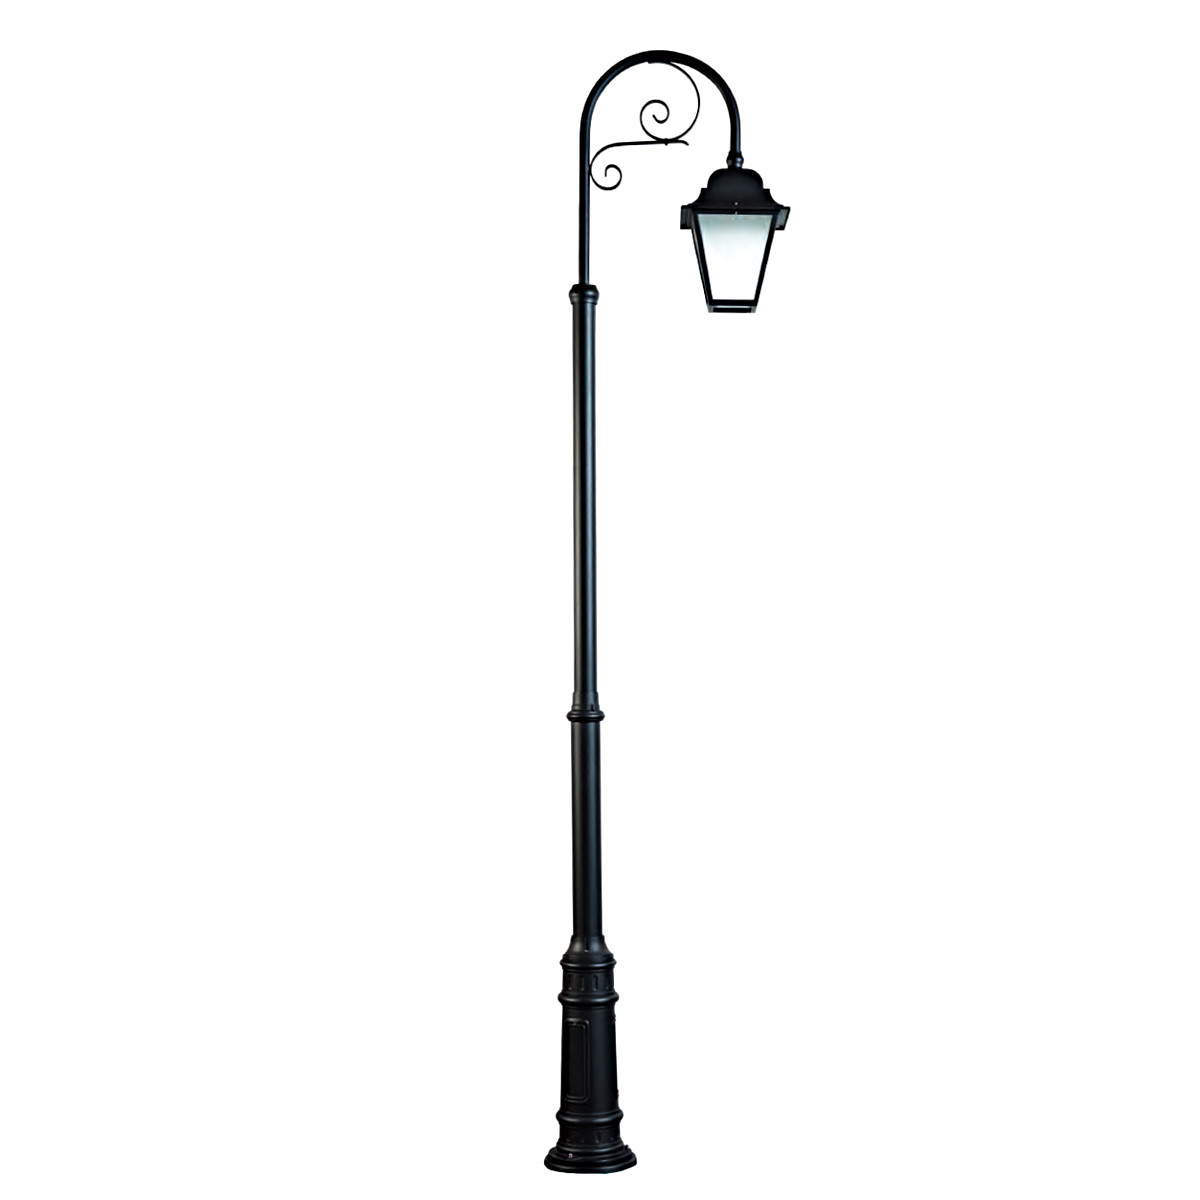 Tall Lamp Post with Floral Dekor